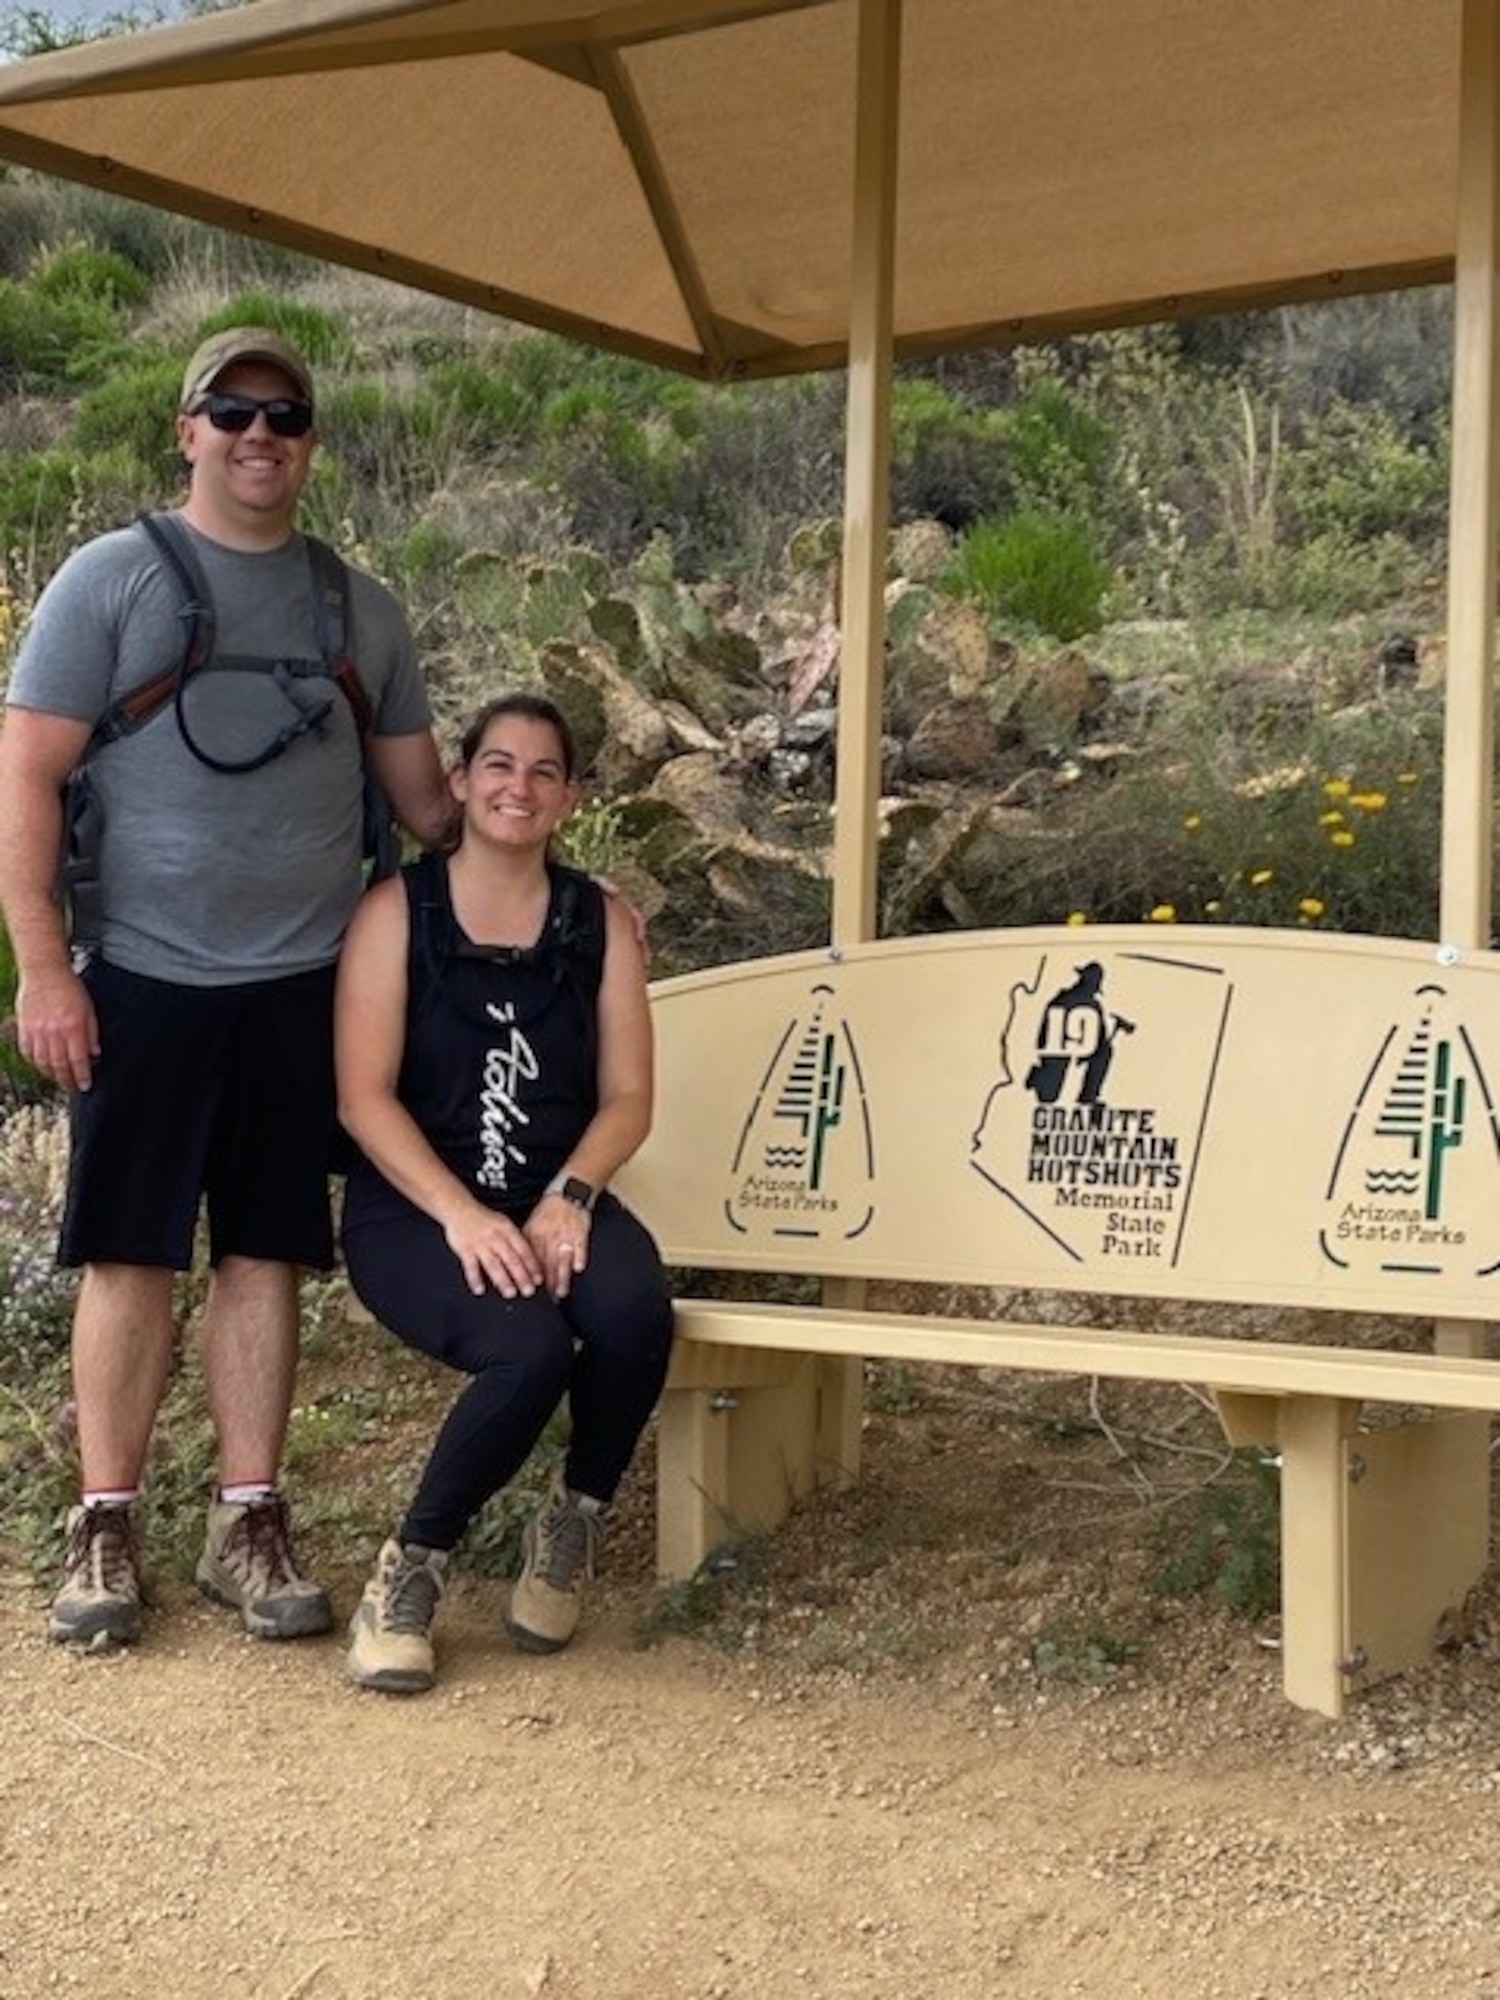 U.S. Air Force Capt. Mike Stockwell (left) and his wife Amanda Stockwell (right) pose at the Granite Mountain Hotshots Memorial State Park, June, 2023.